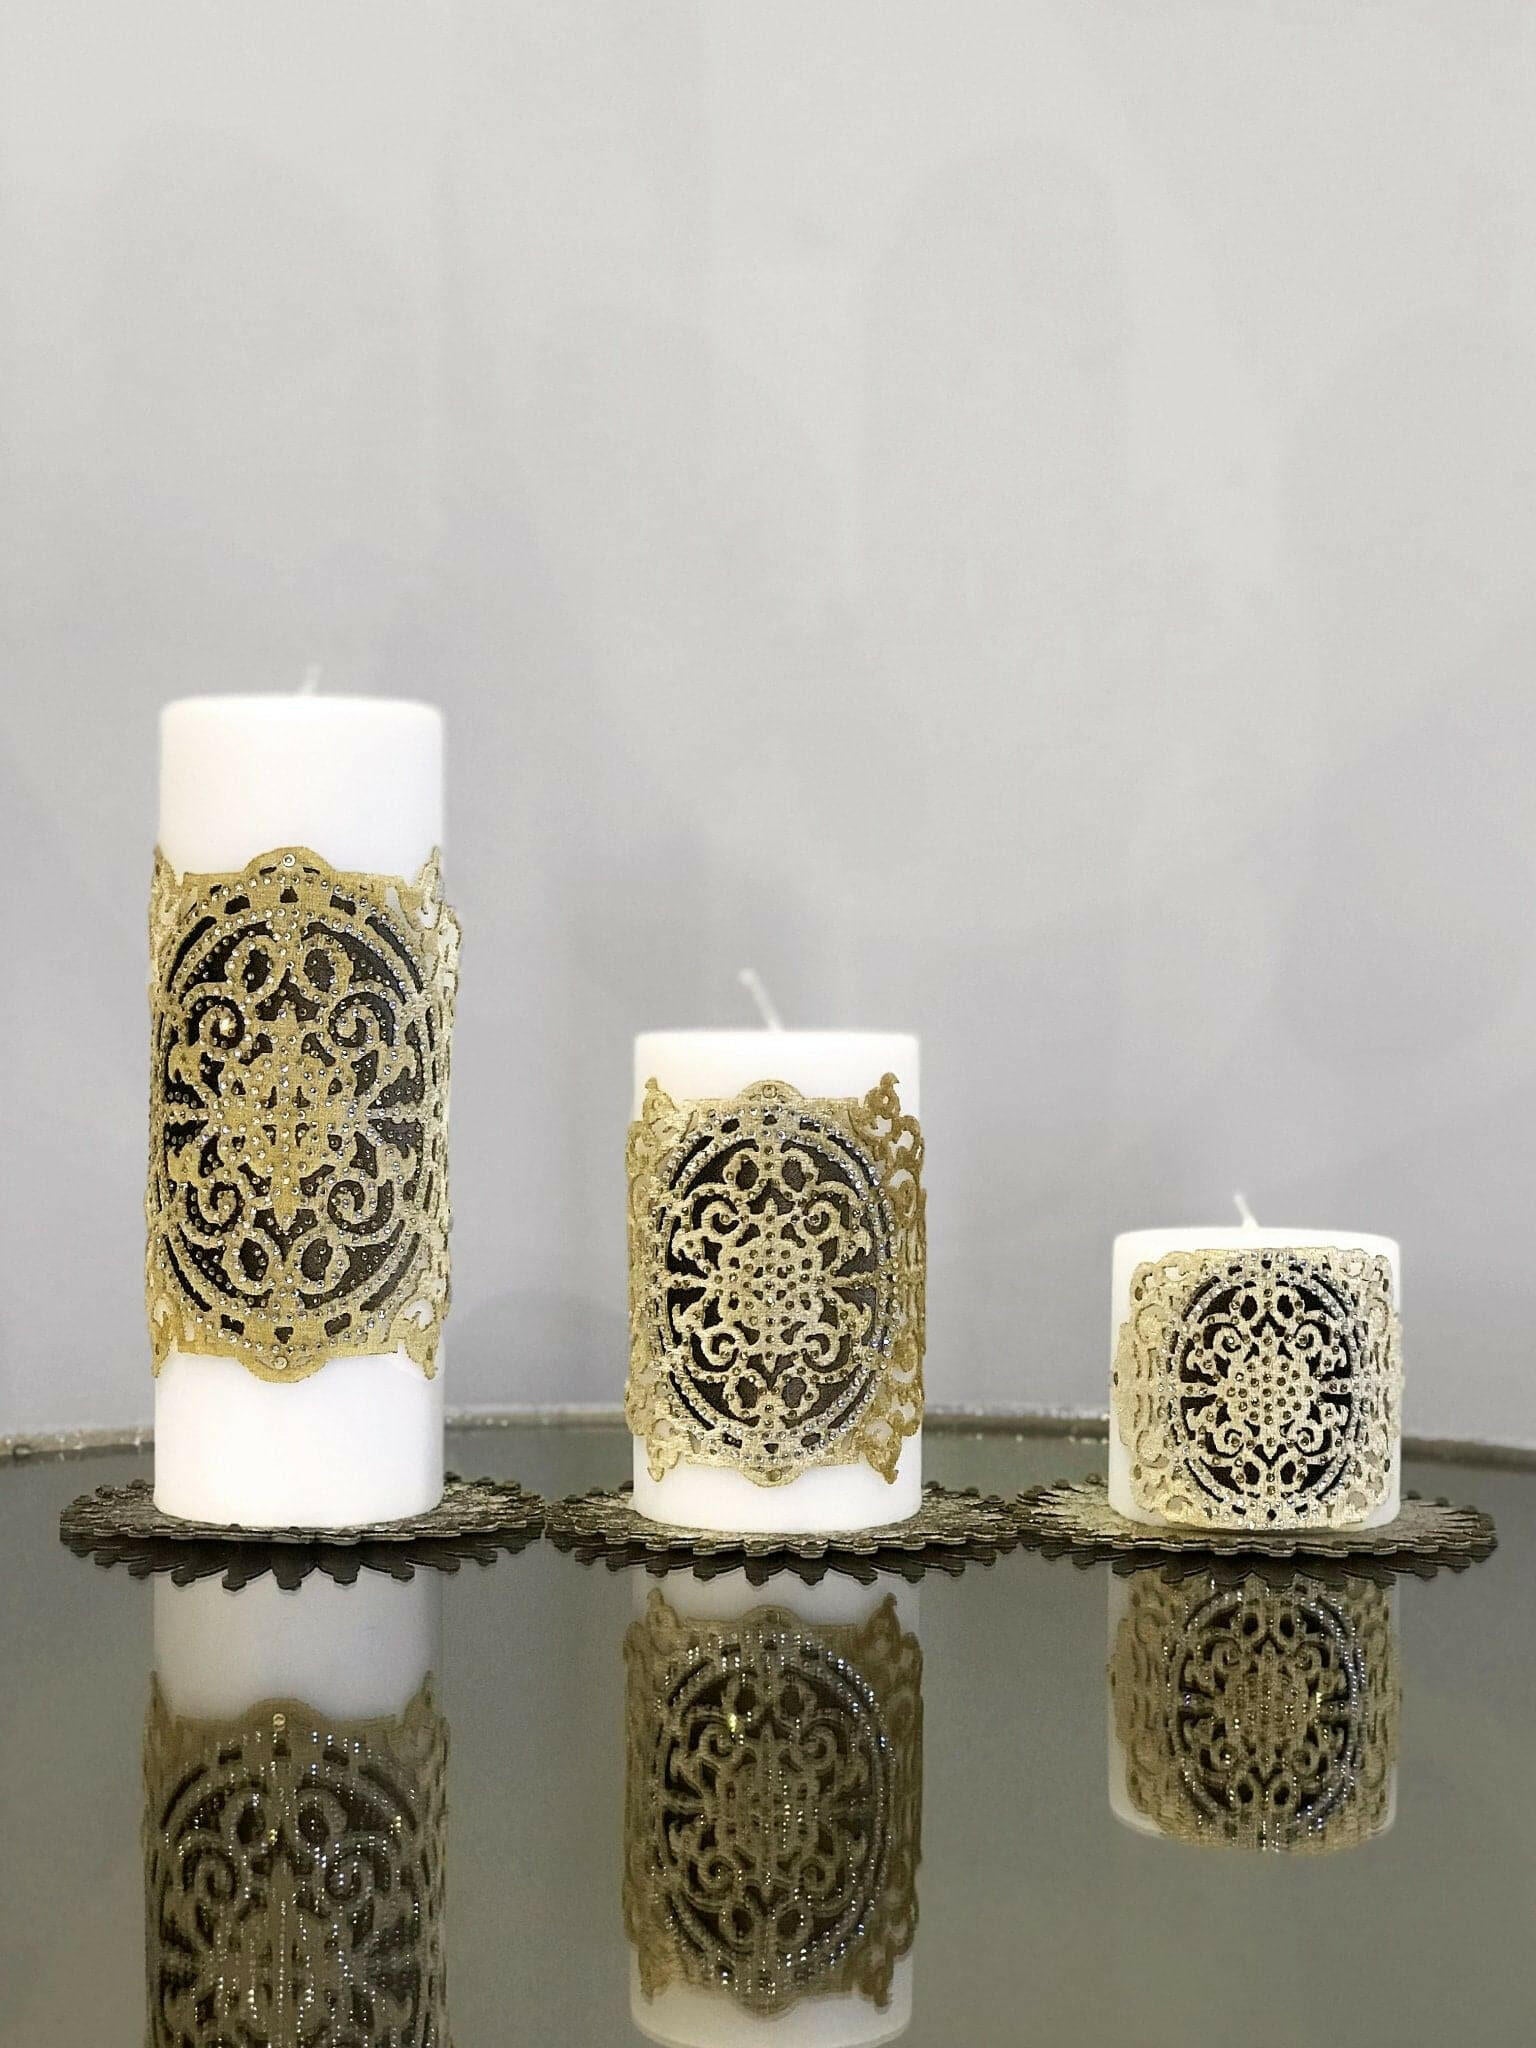 Ruya Gold Velvet Applied Candle Set of 3, Royal Style Luxury Decorative Candles from Creative Home,CS-CH-RUYA-Go